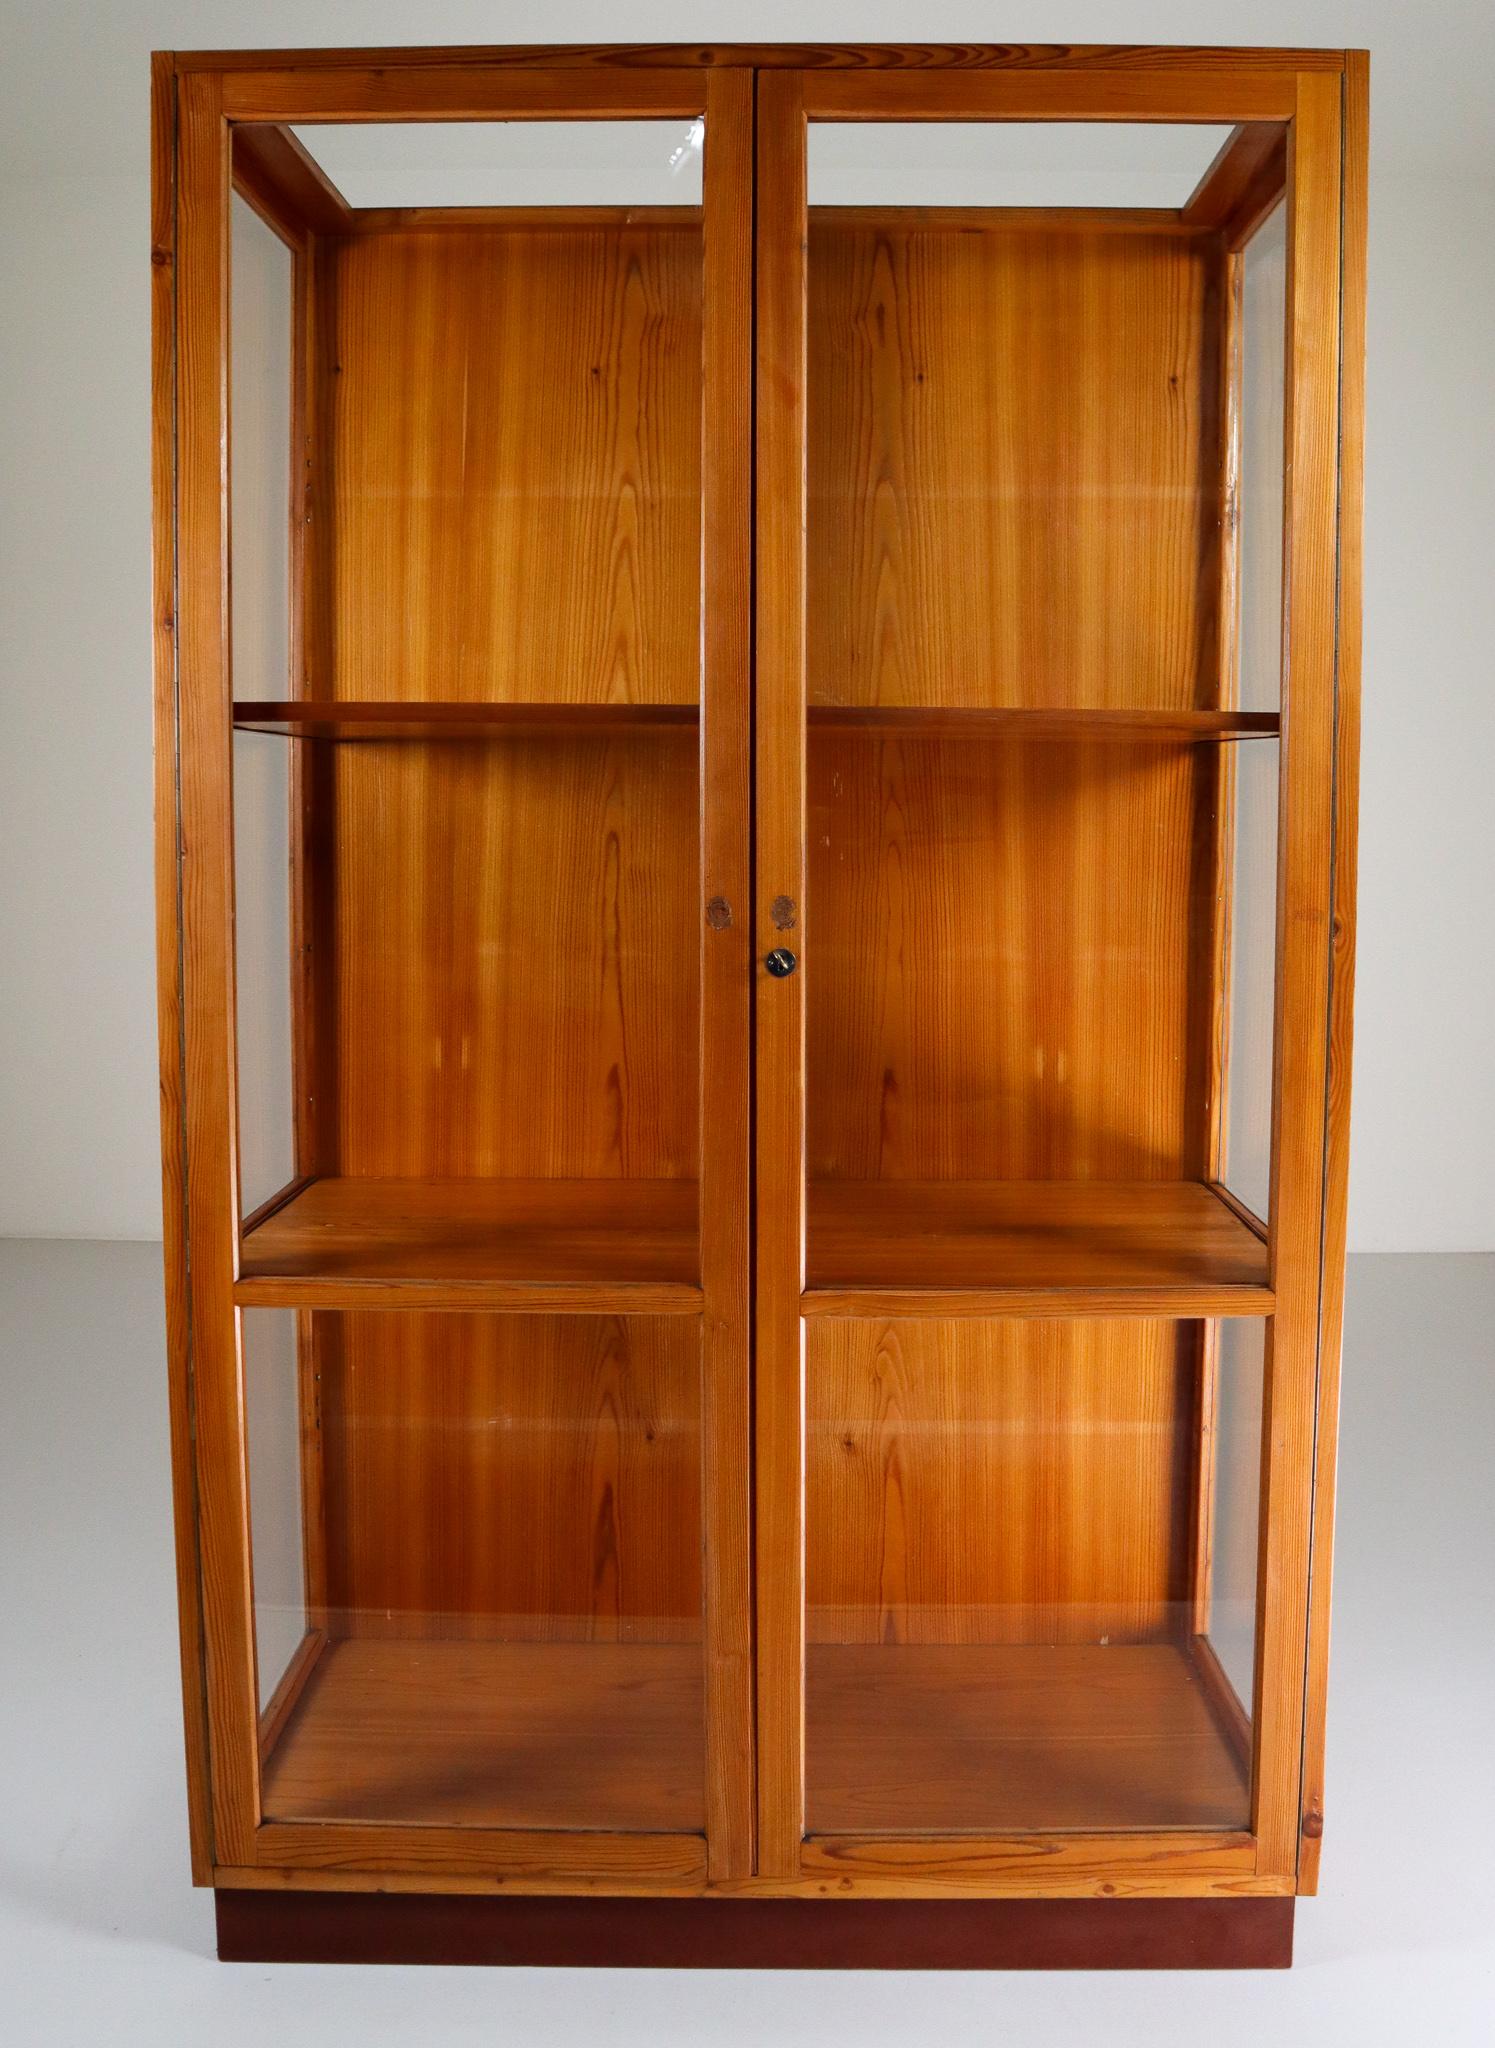 Large glazed display cabinet with perfect patina and original glass made in Praque Czech Republic 1950s for the National U P Museum Praha in solid Pine .The wooden shelves can be height adjusted. Pieces like this with original patina and glass are